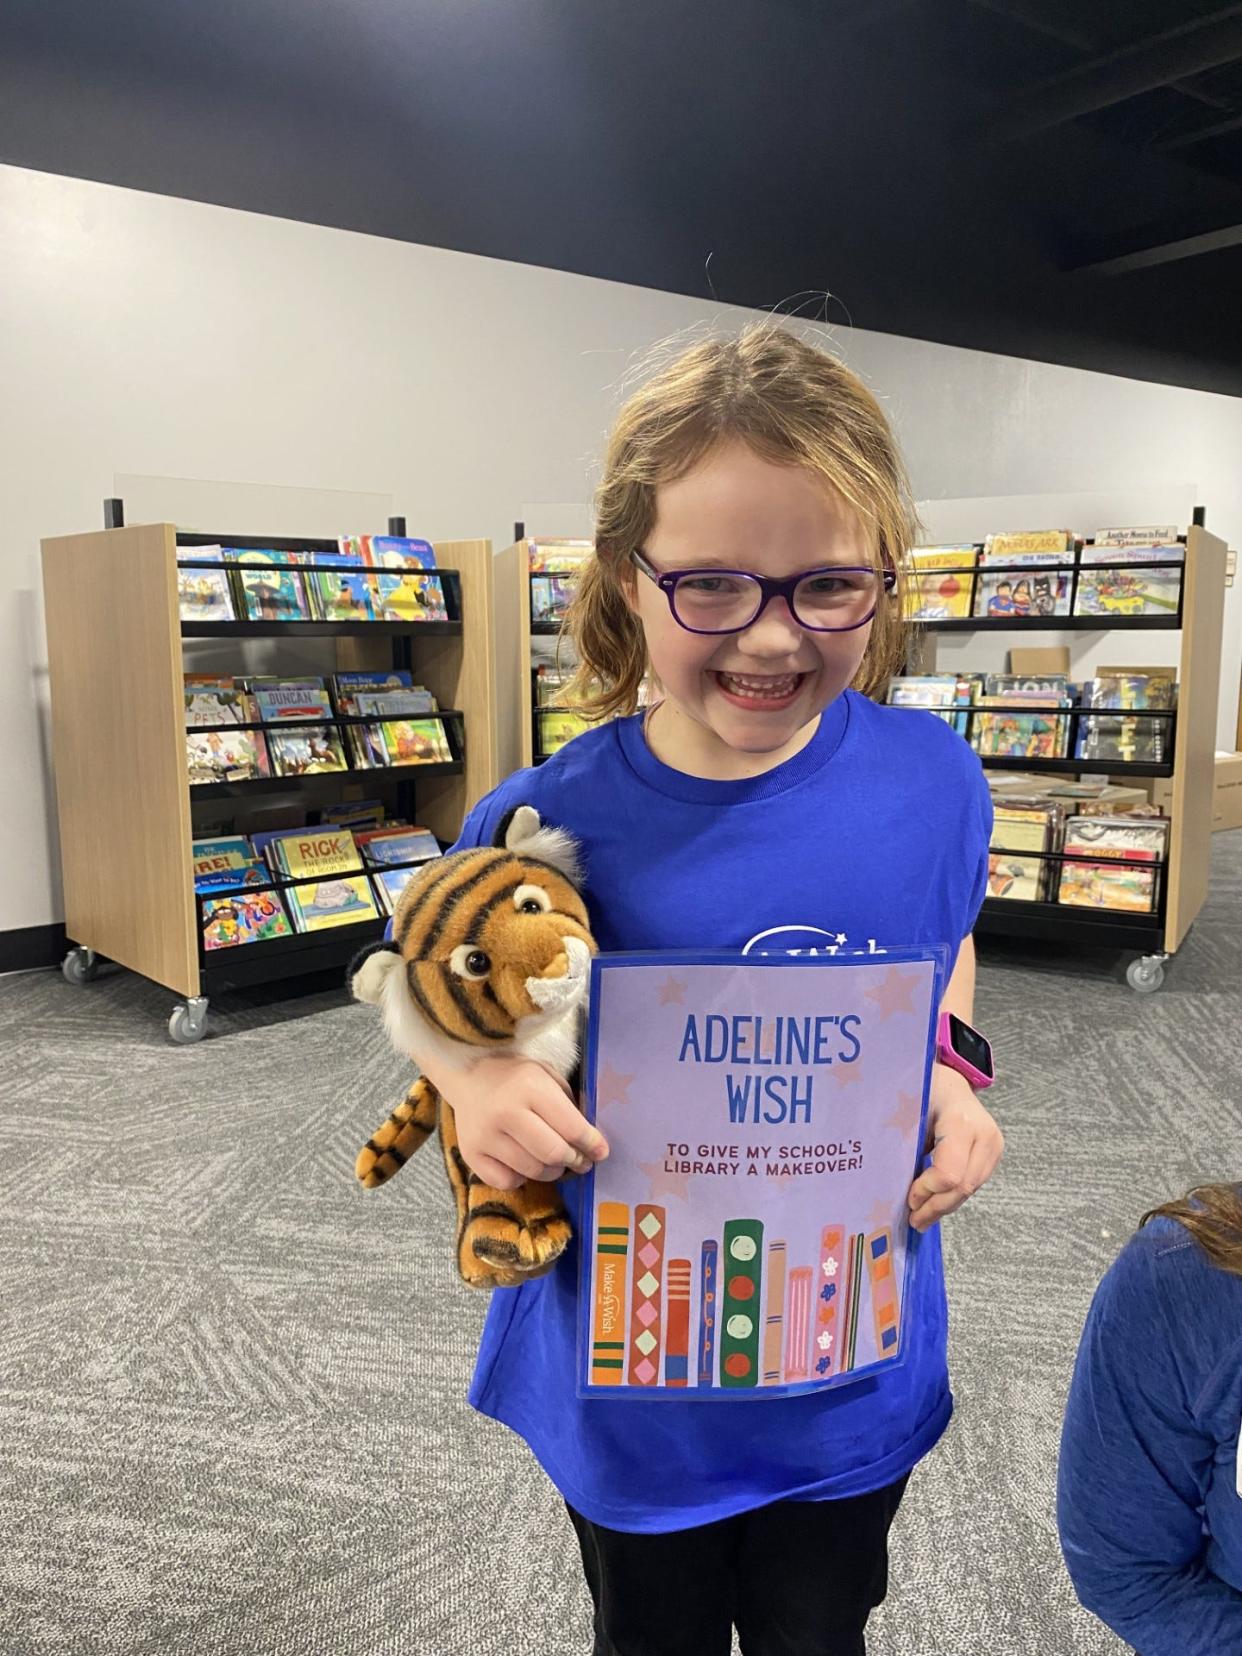 Adeline Ory celebrates the reveal of her Make-a-Wish: a makeover of the Earlham Community School District library.